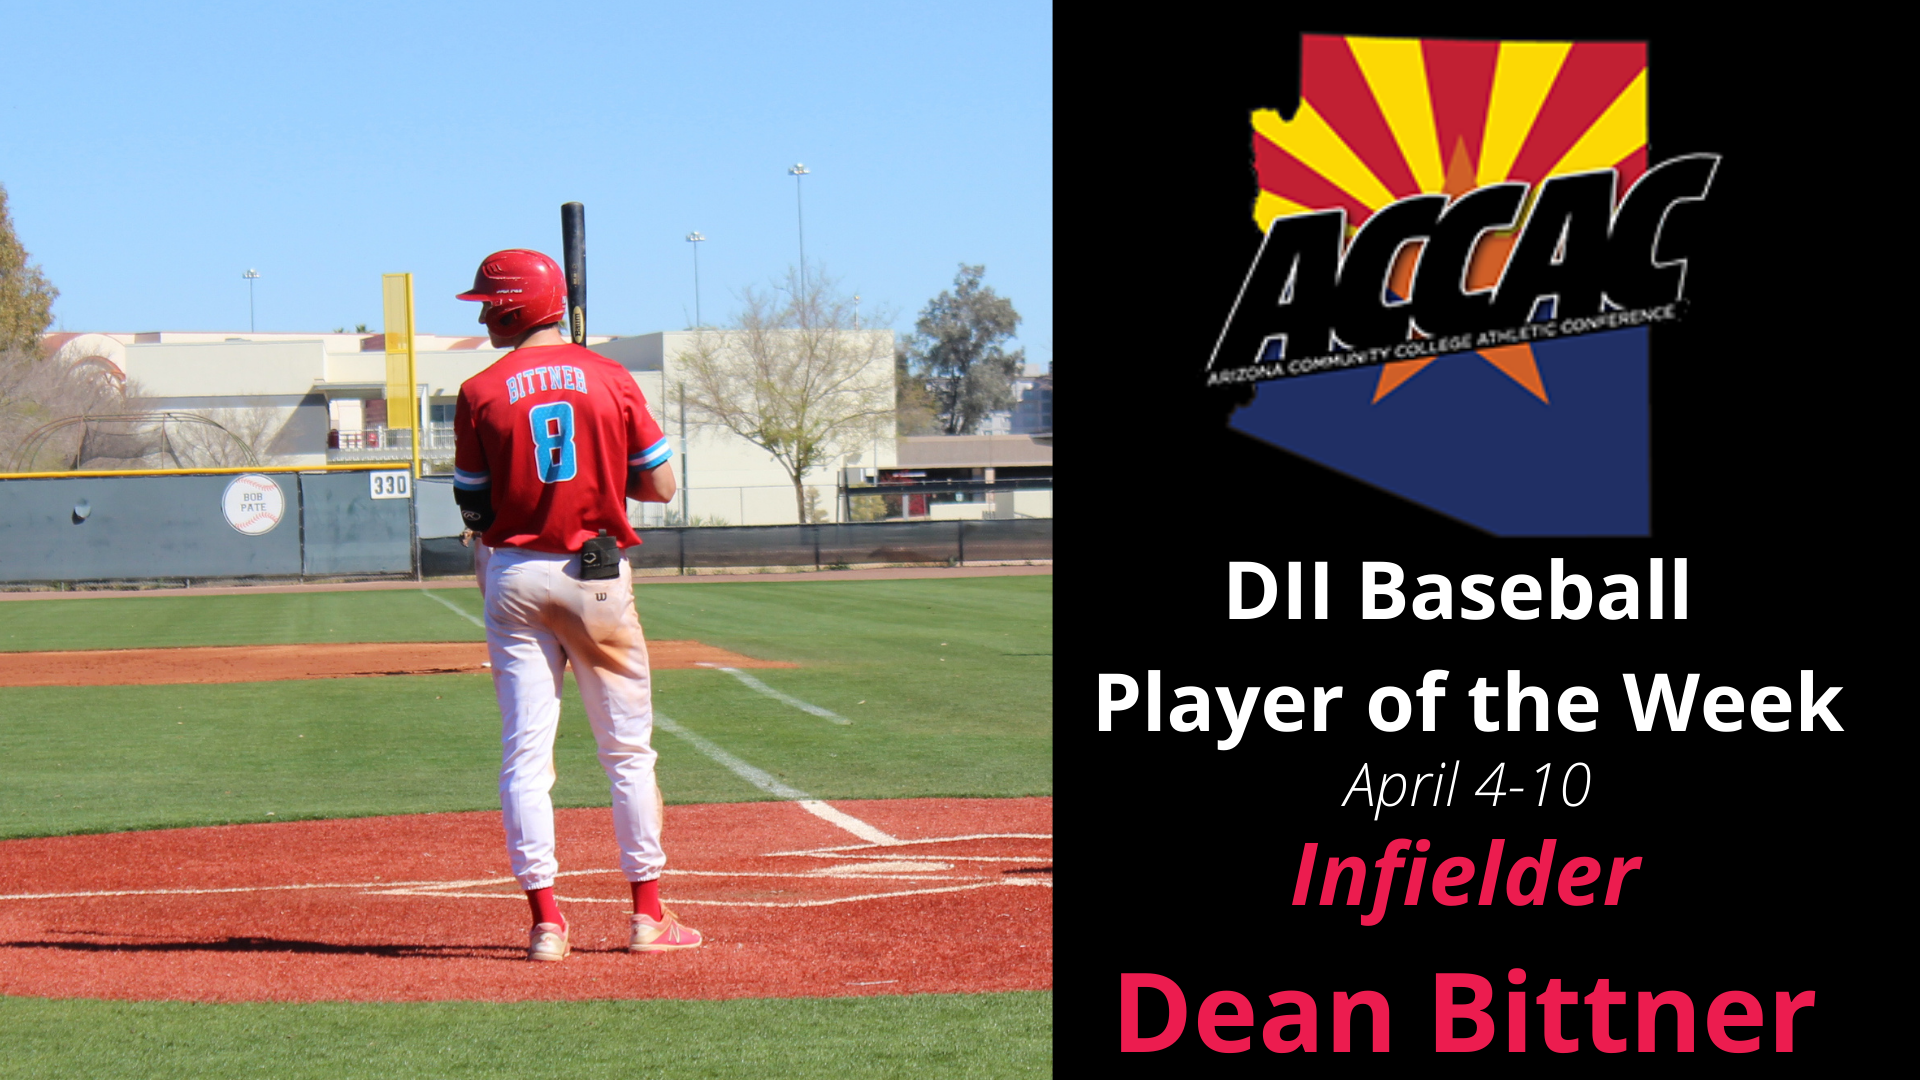 Dean Bittner Named ACCAC DII Baseball Player of the Week